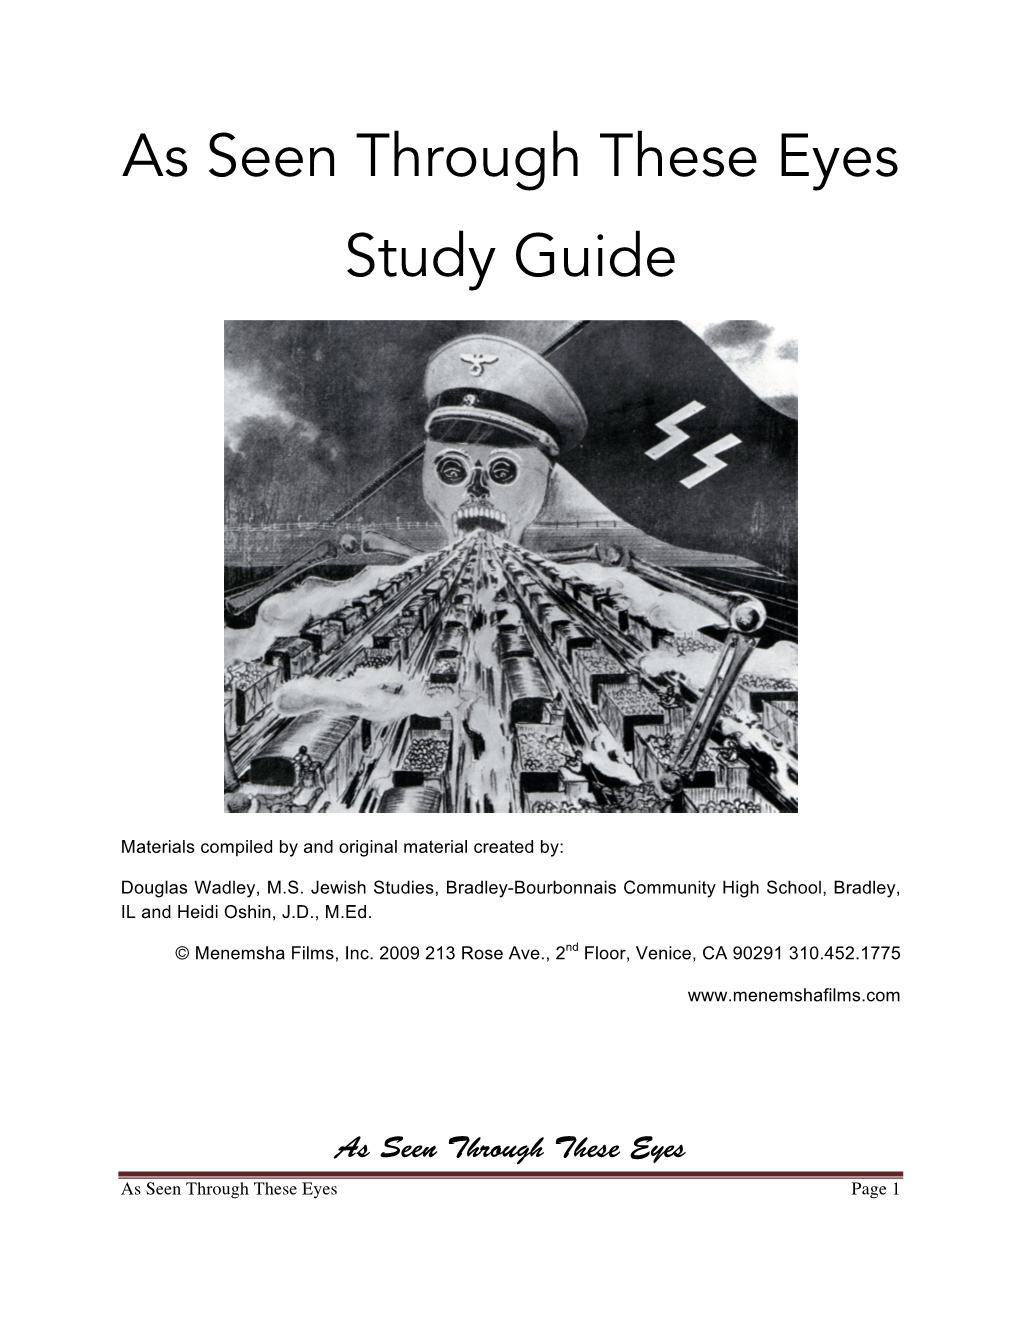 As Seen Through These Eyes Study Guide